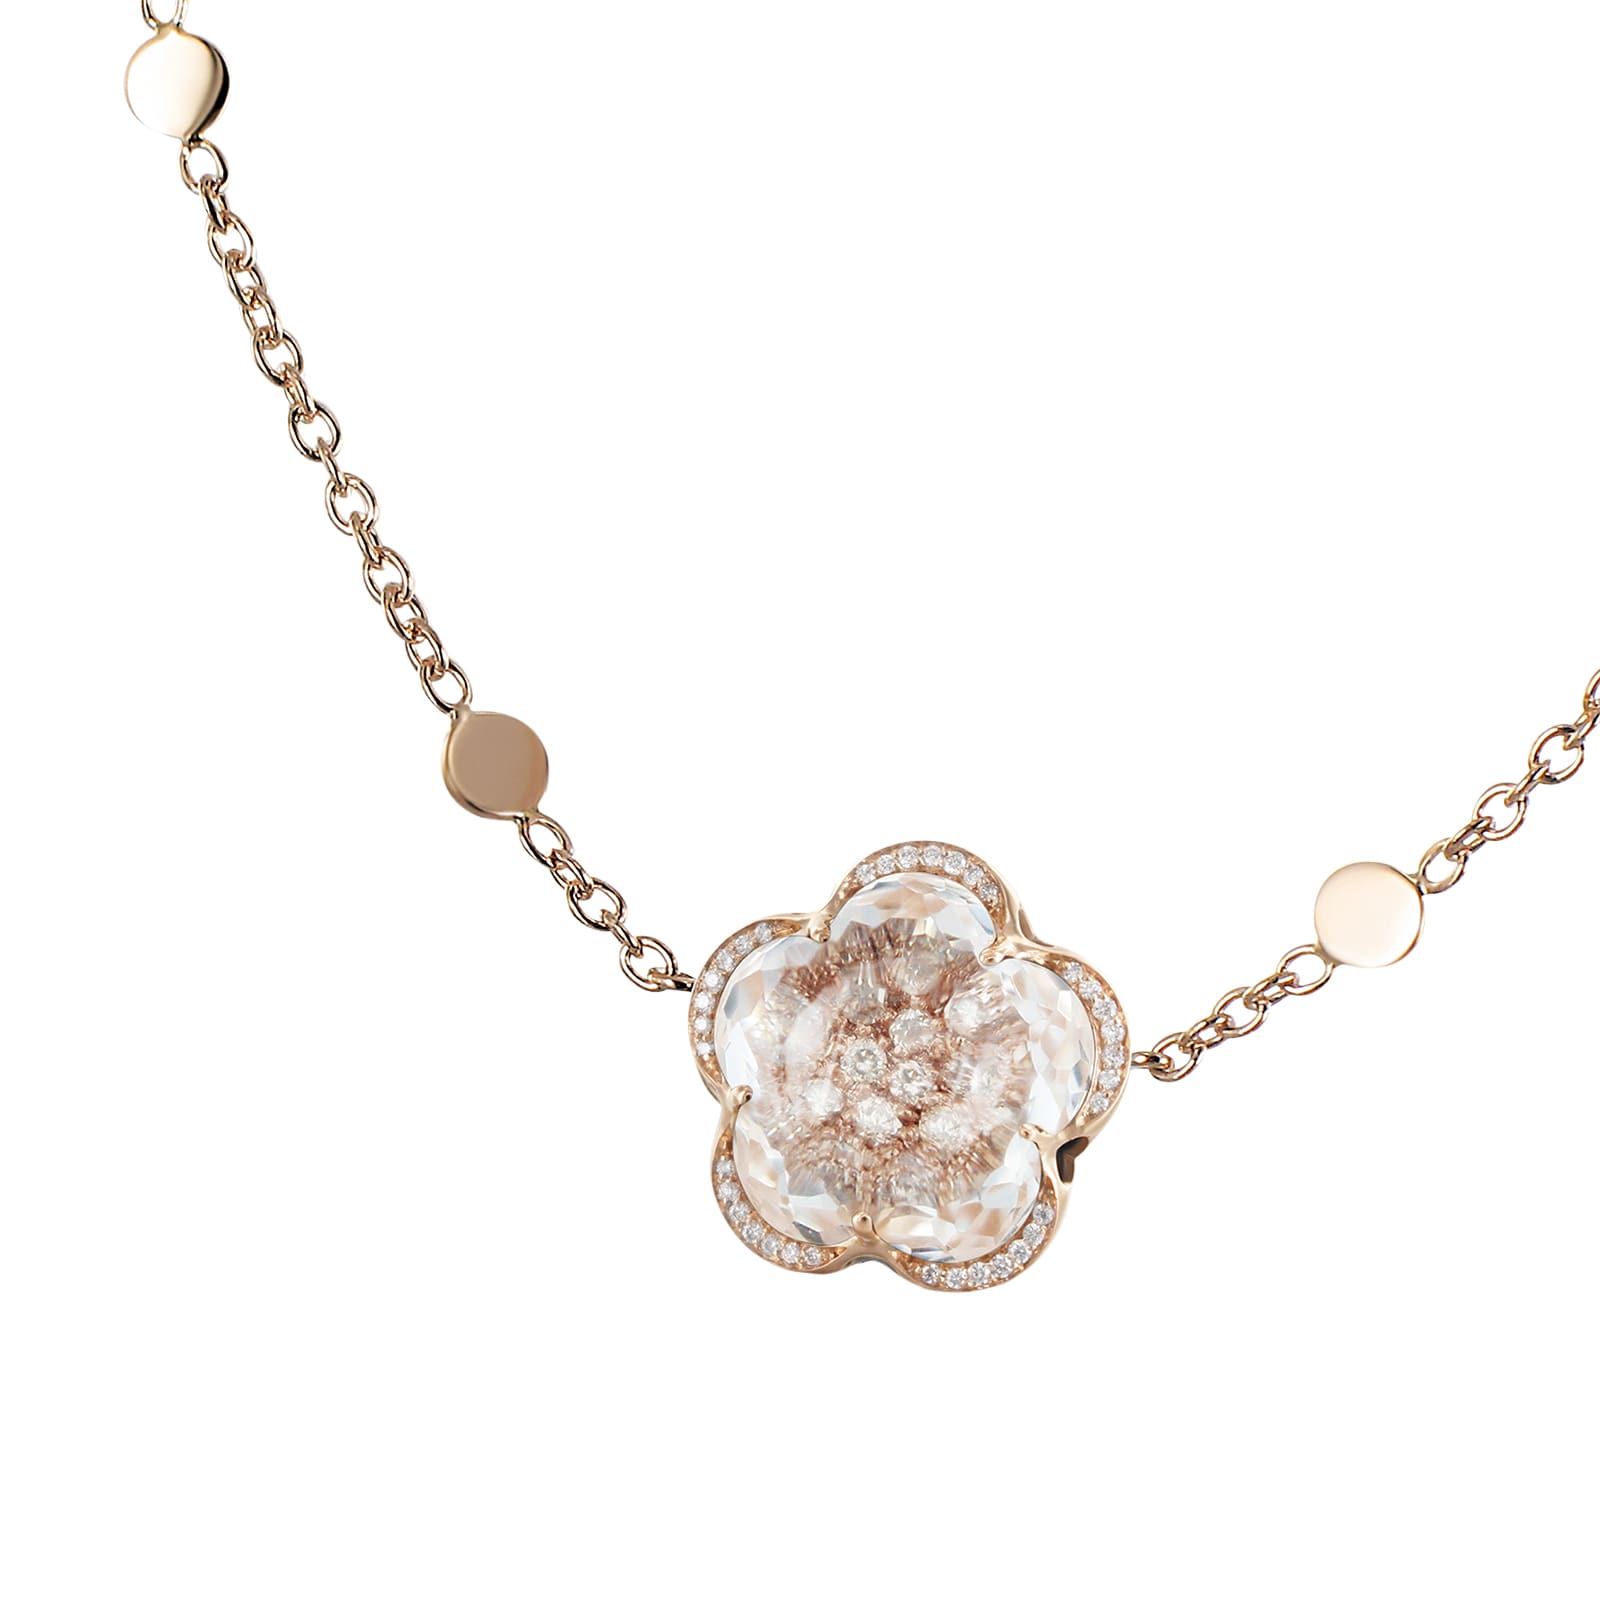 Bon Ton Necklace in 18ct Rose Gold with Rock Crystal, White and Champagne Diamonds